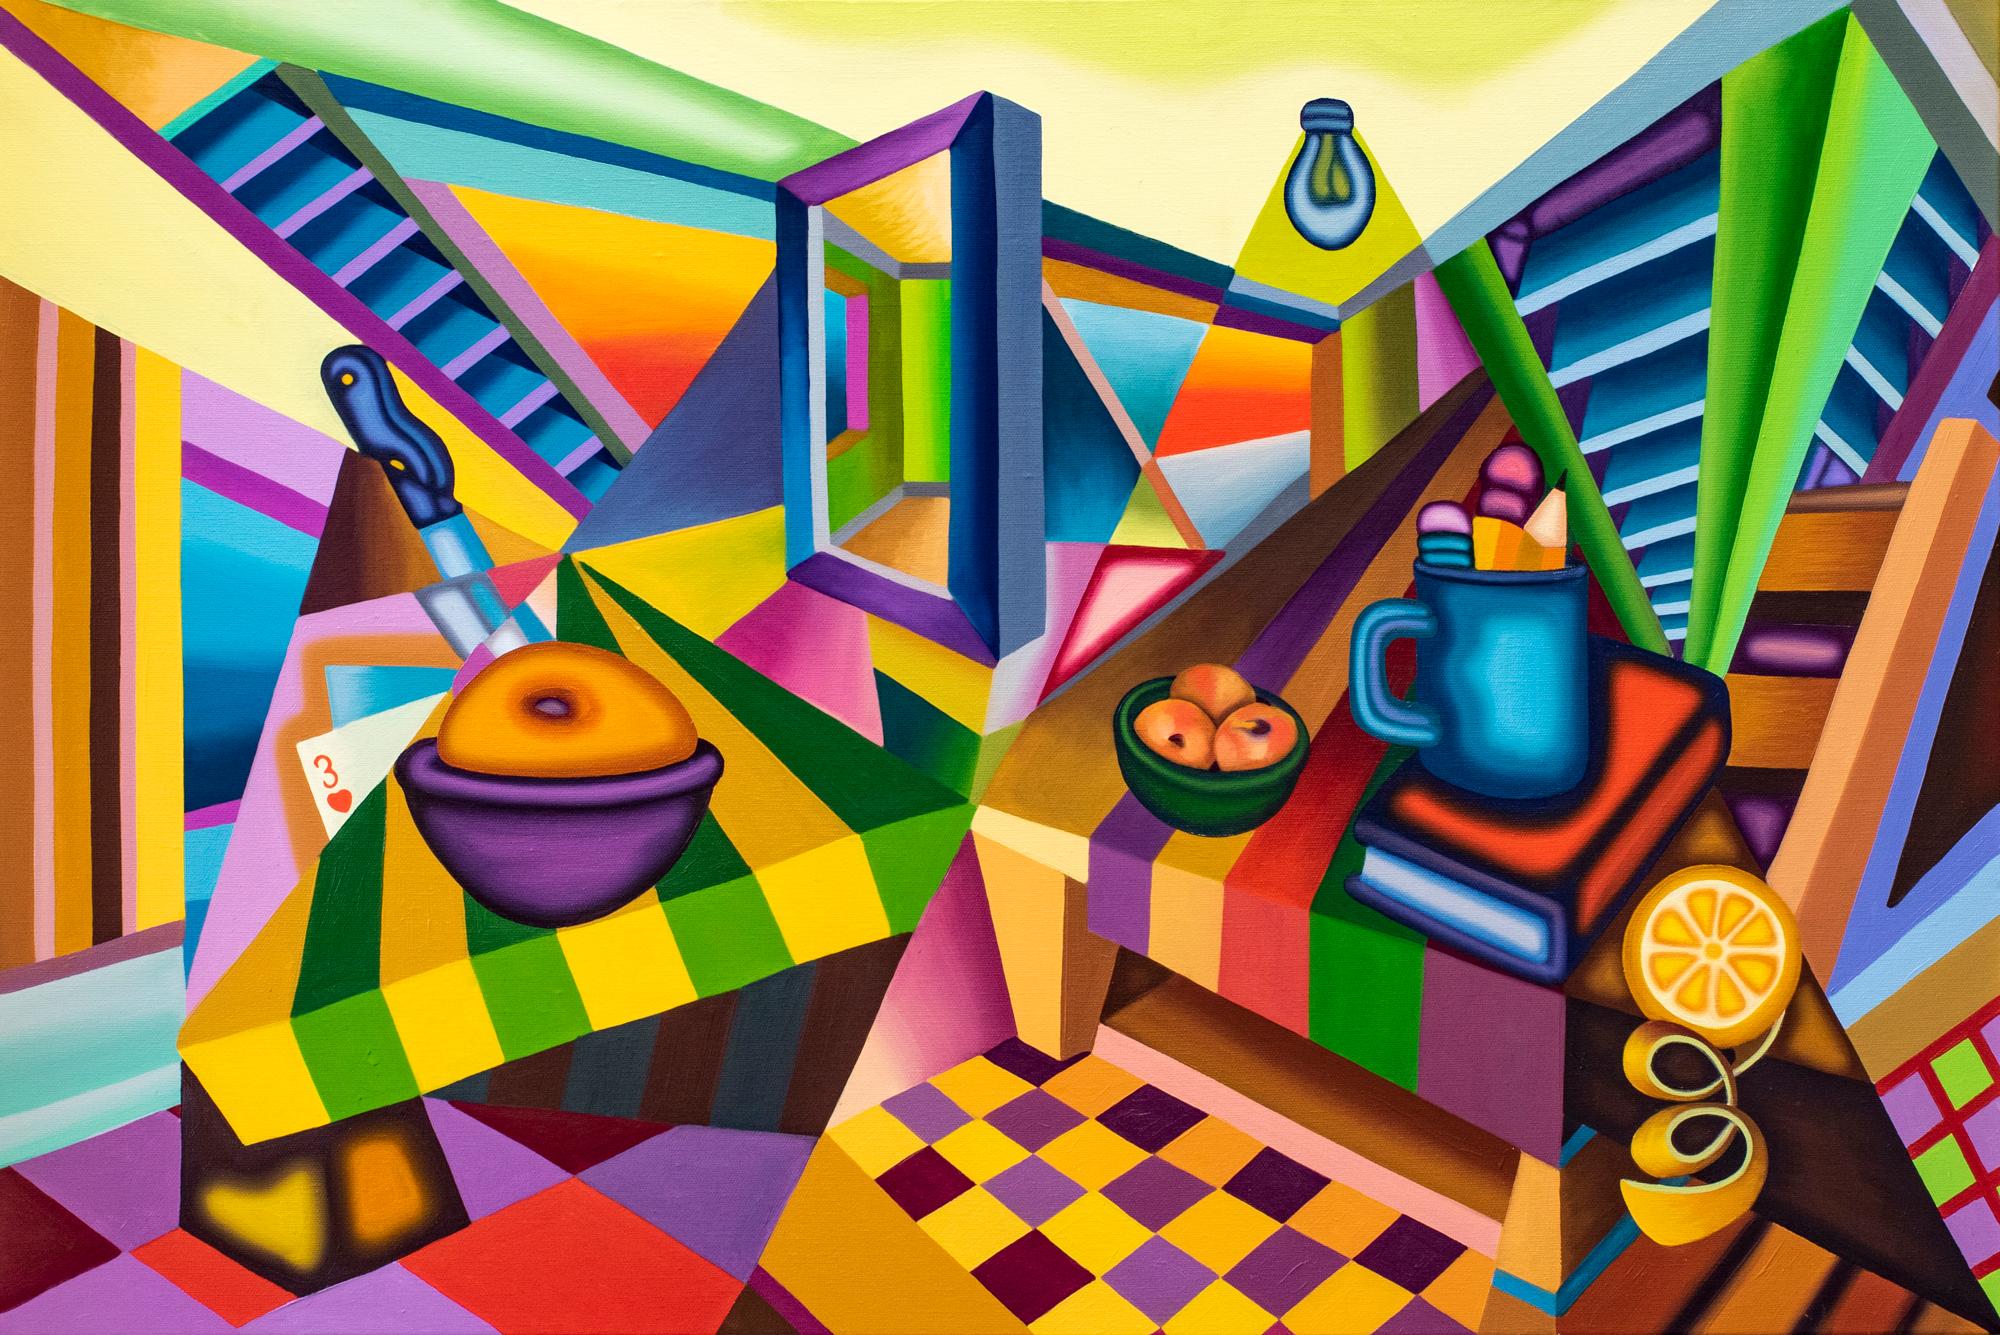 Dawning - Cubist, Bright & Bold Surreal Still Life with Table, Fruit, Tile